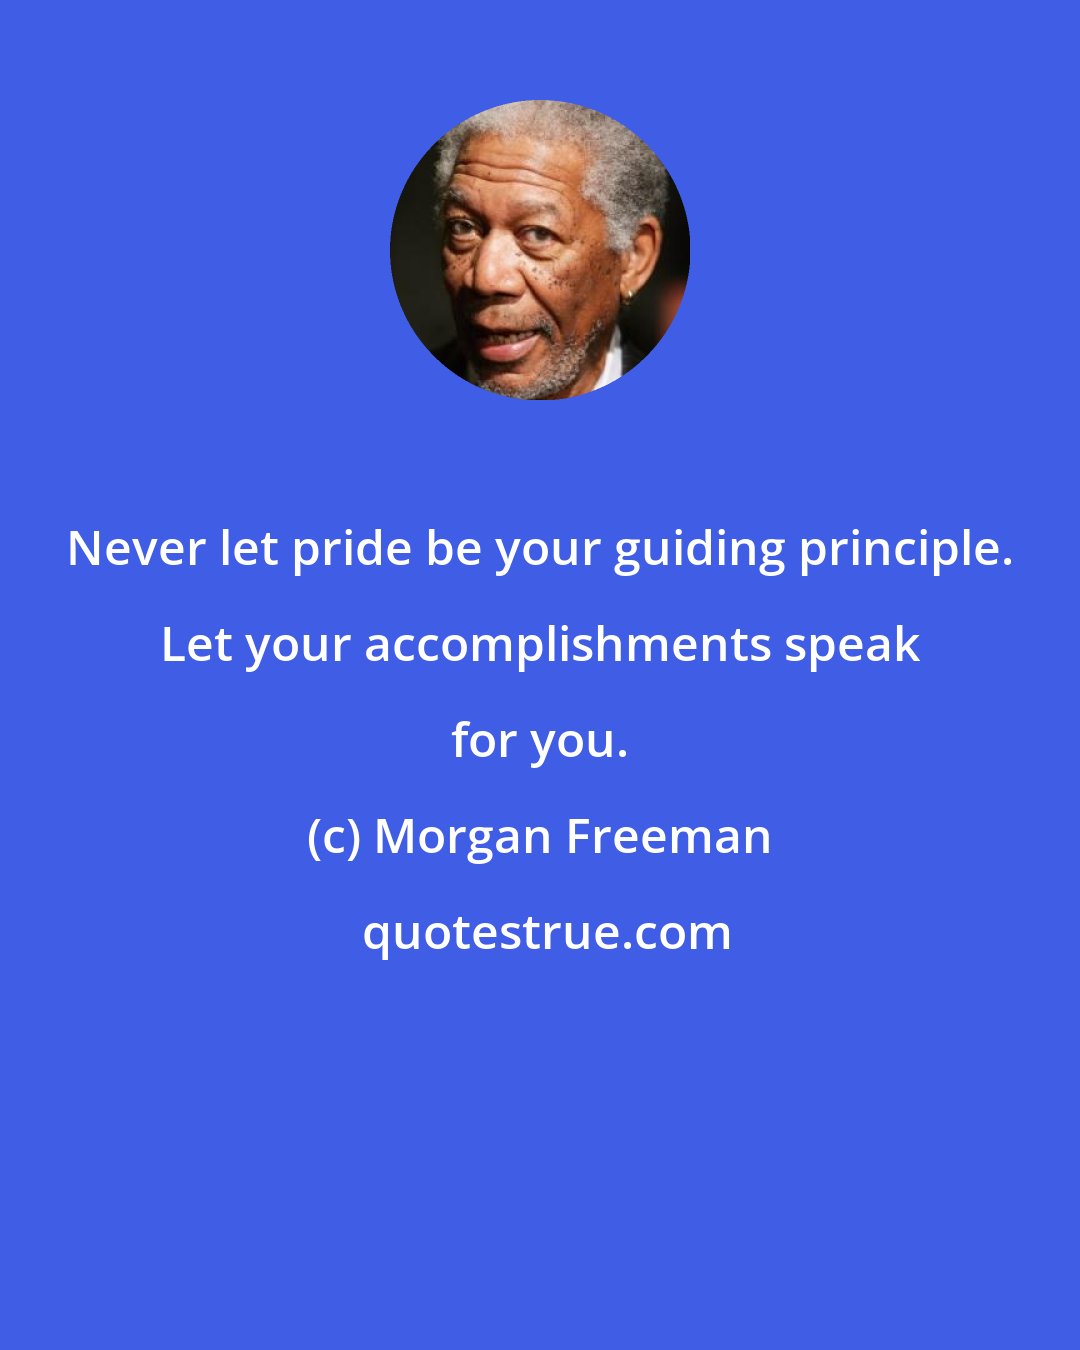 Morgan Freeman: Never let pride be your guiding principle. Let your accomplishments speak for you.